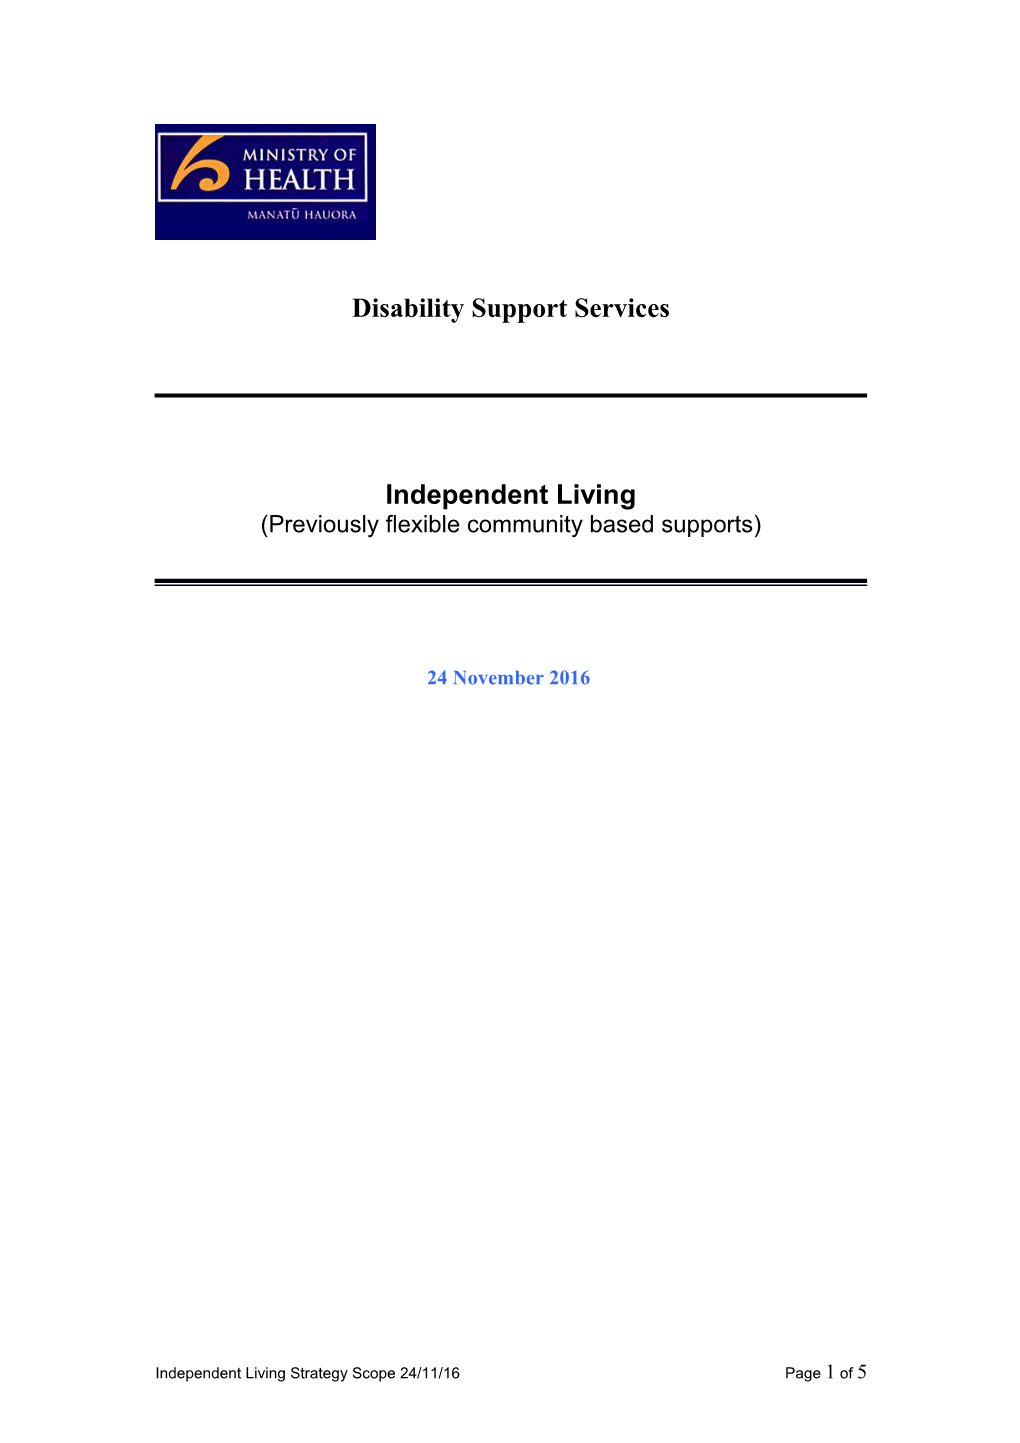 Independent Living (Previously Flexible Community Based Supports)